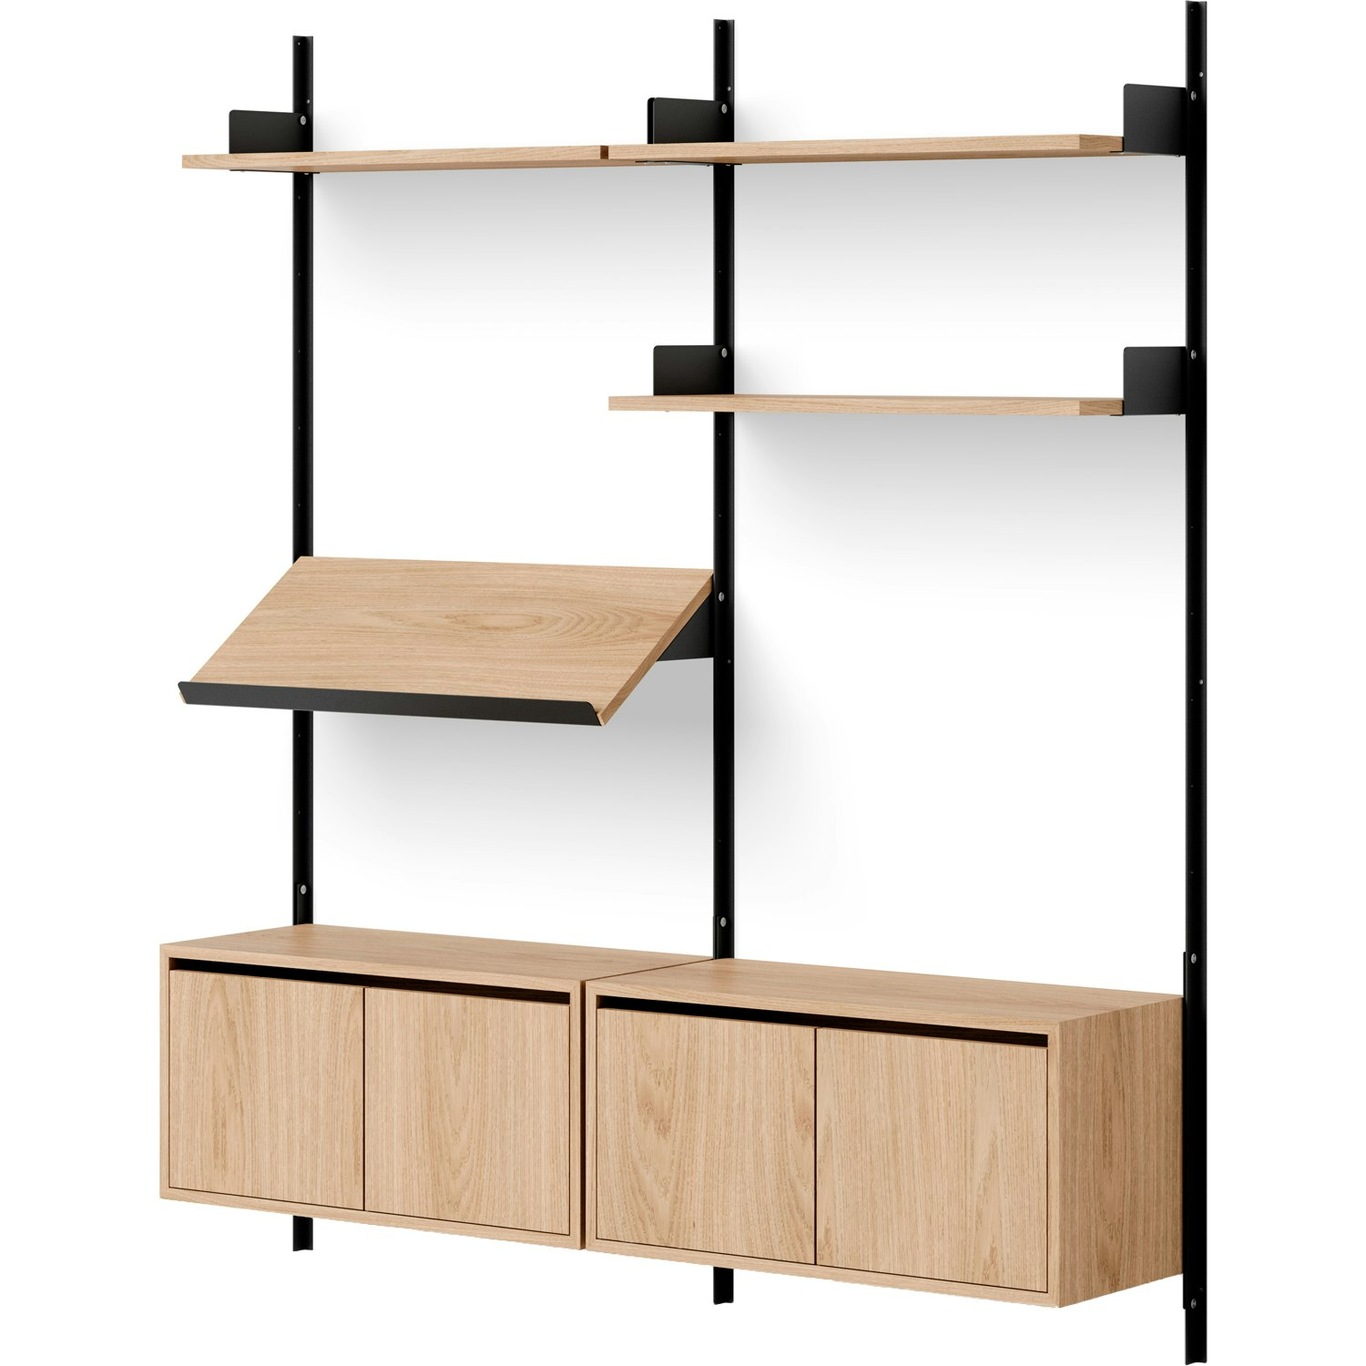 Living Wall Shelf Two Low Cabinets With Doors, Oak / Black